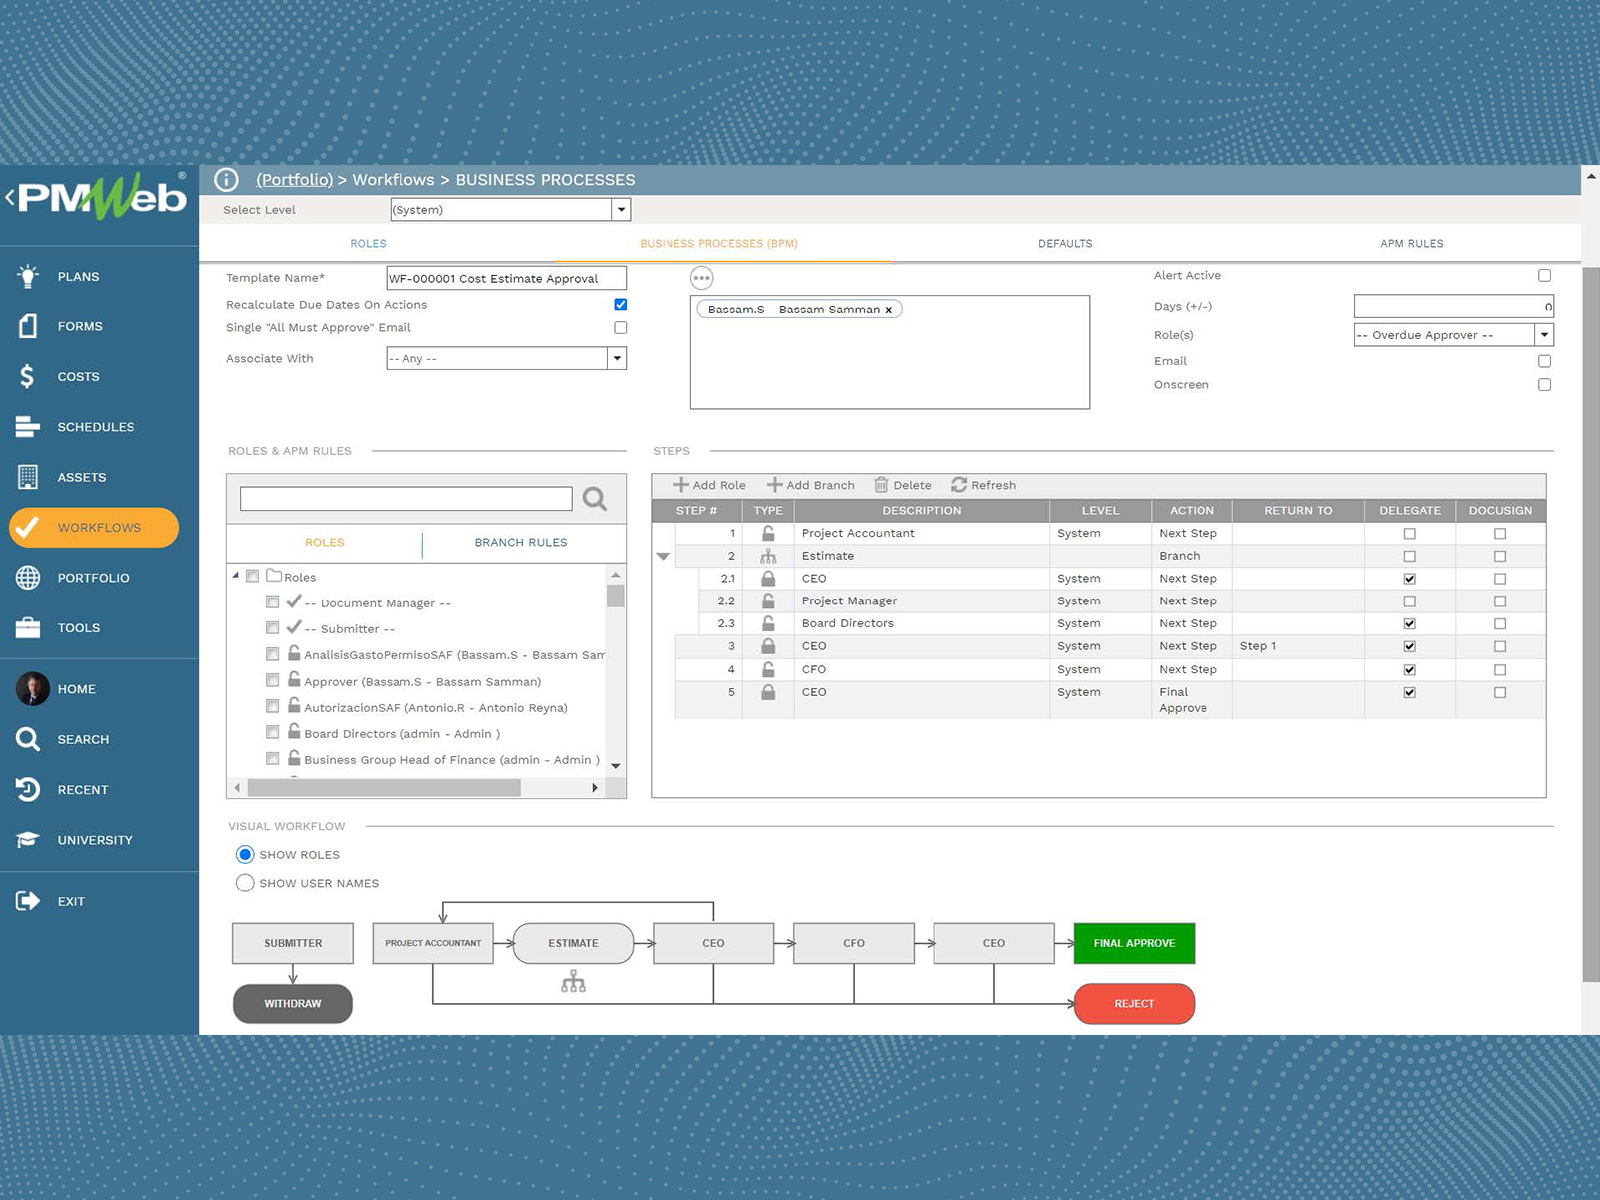 Customize workflows for any business process.